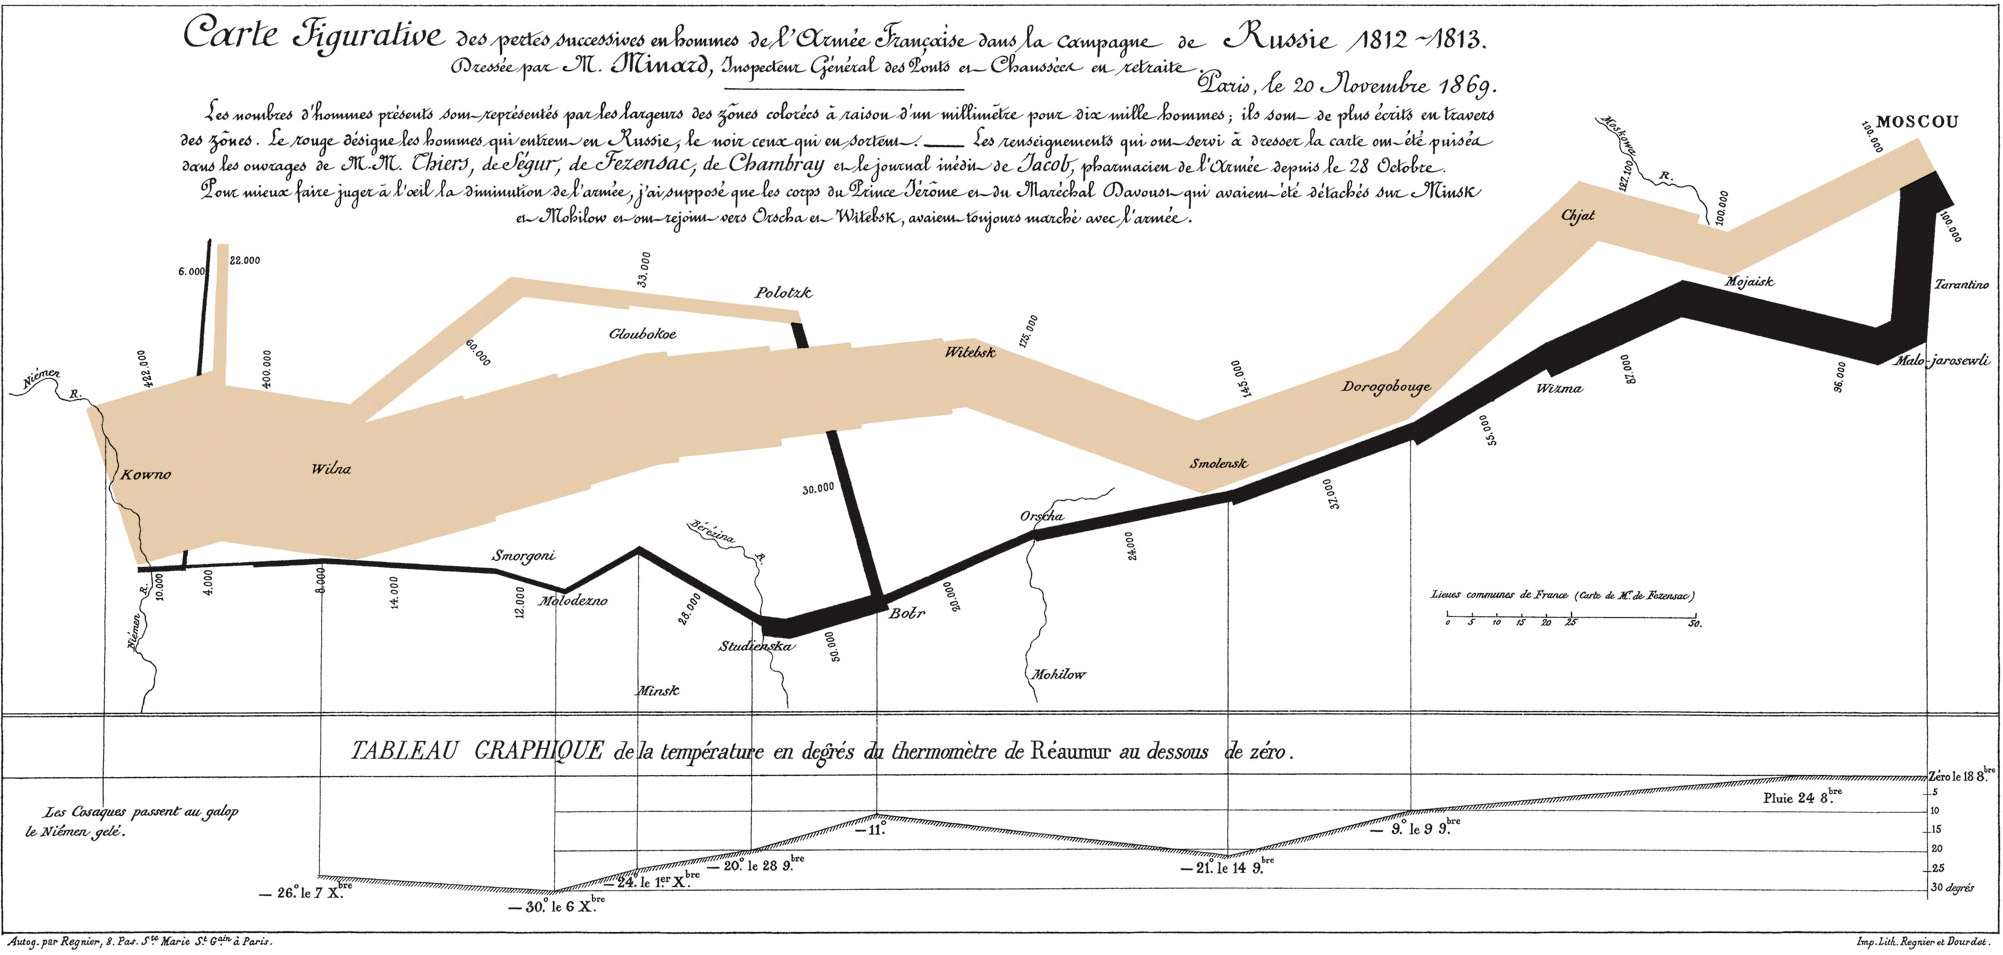 Graphic showing how the size of Napoleon's army shrank during his invasion of Russia in 1812